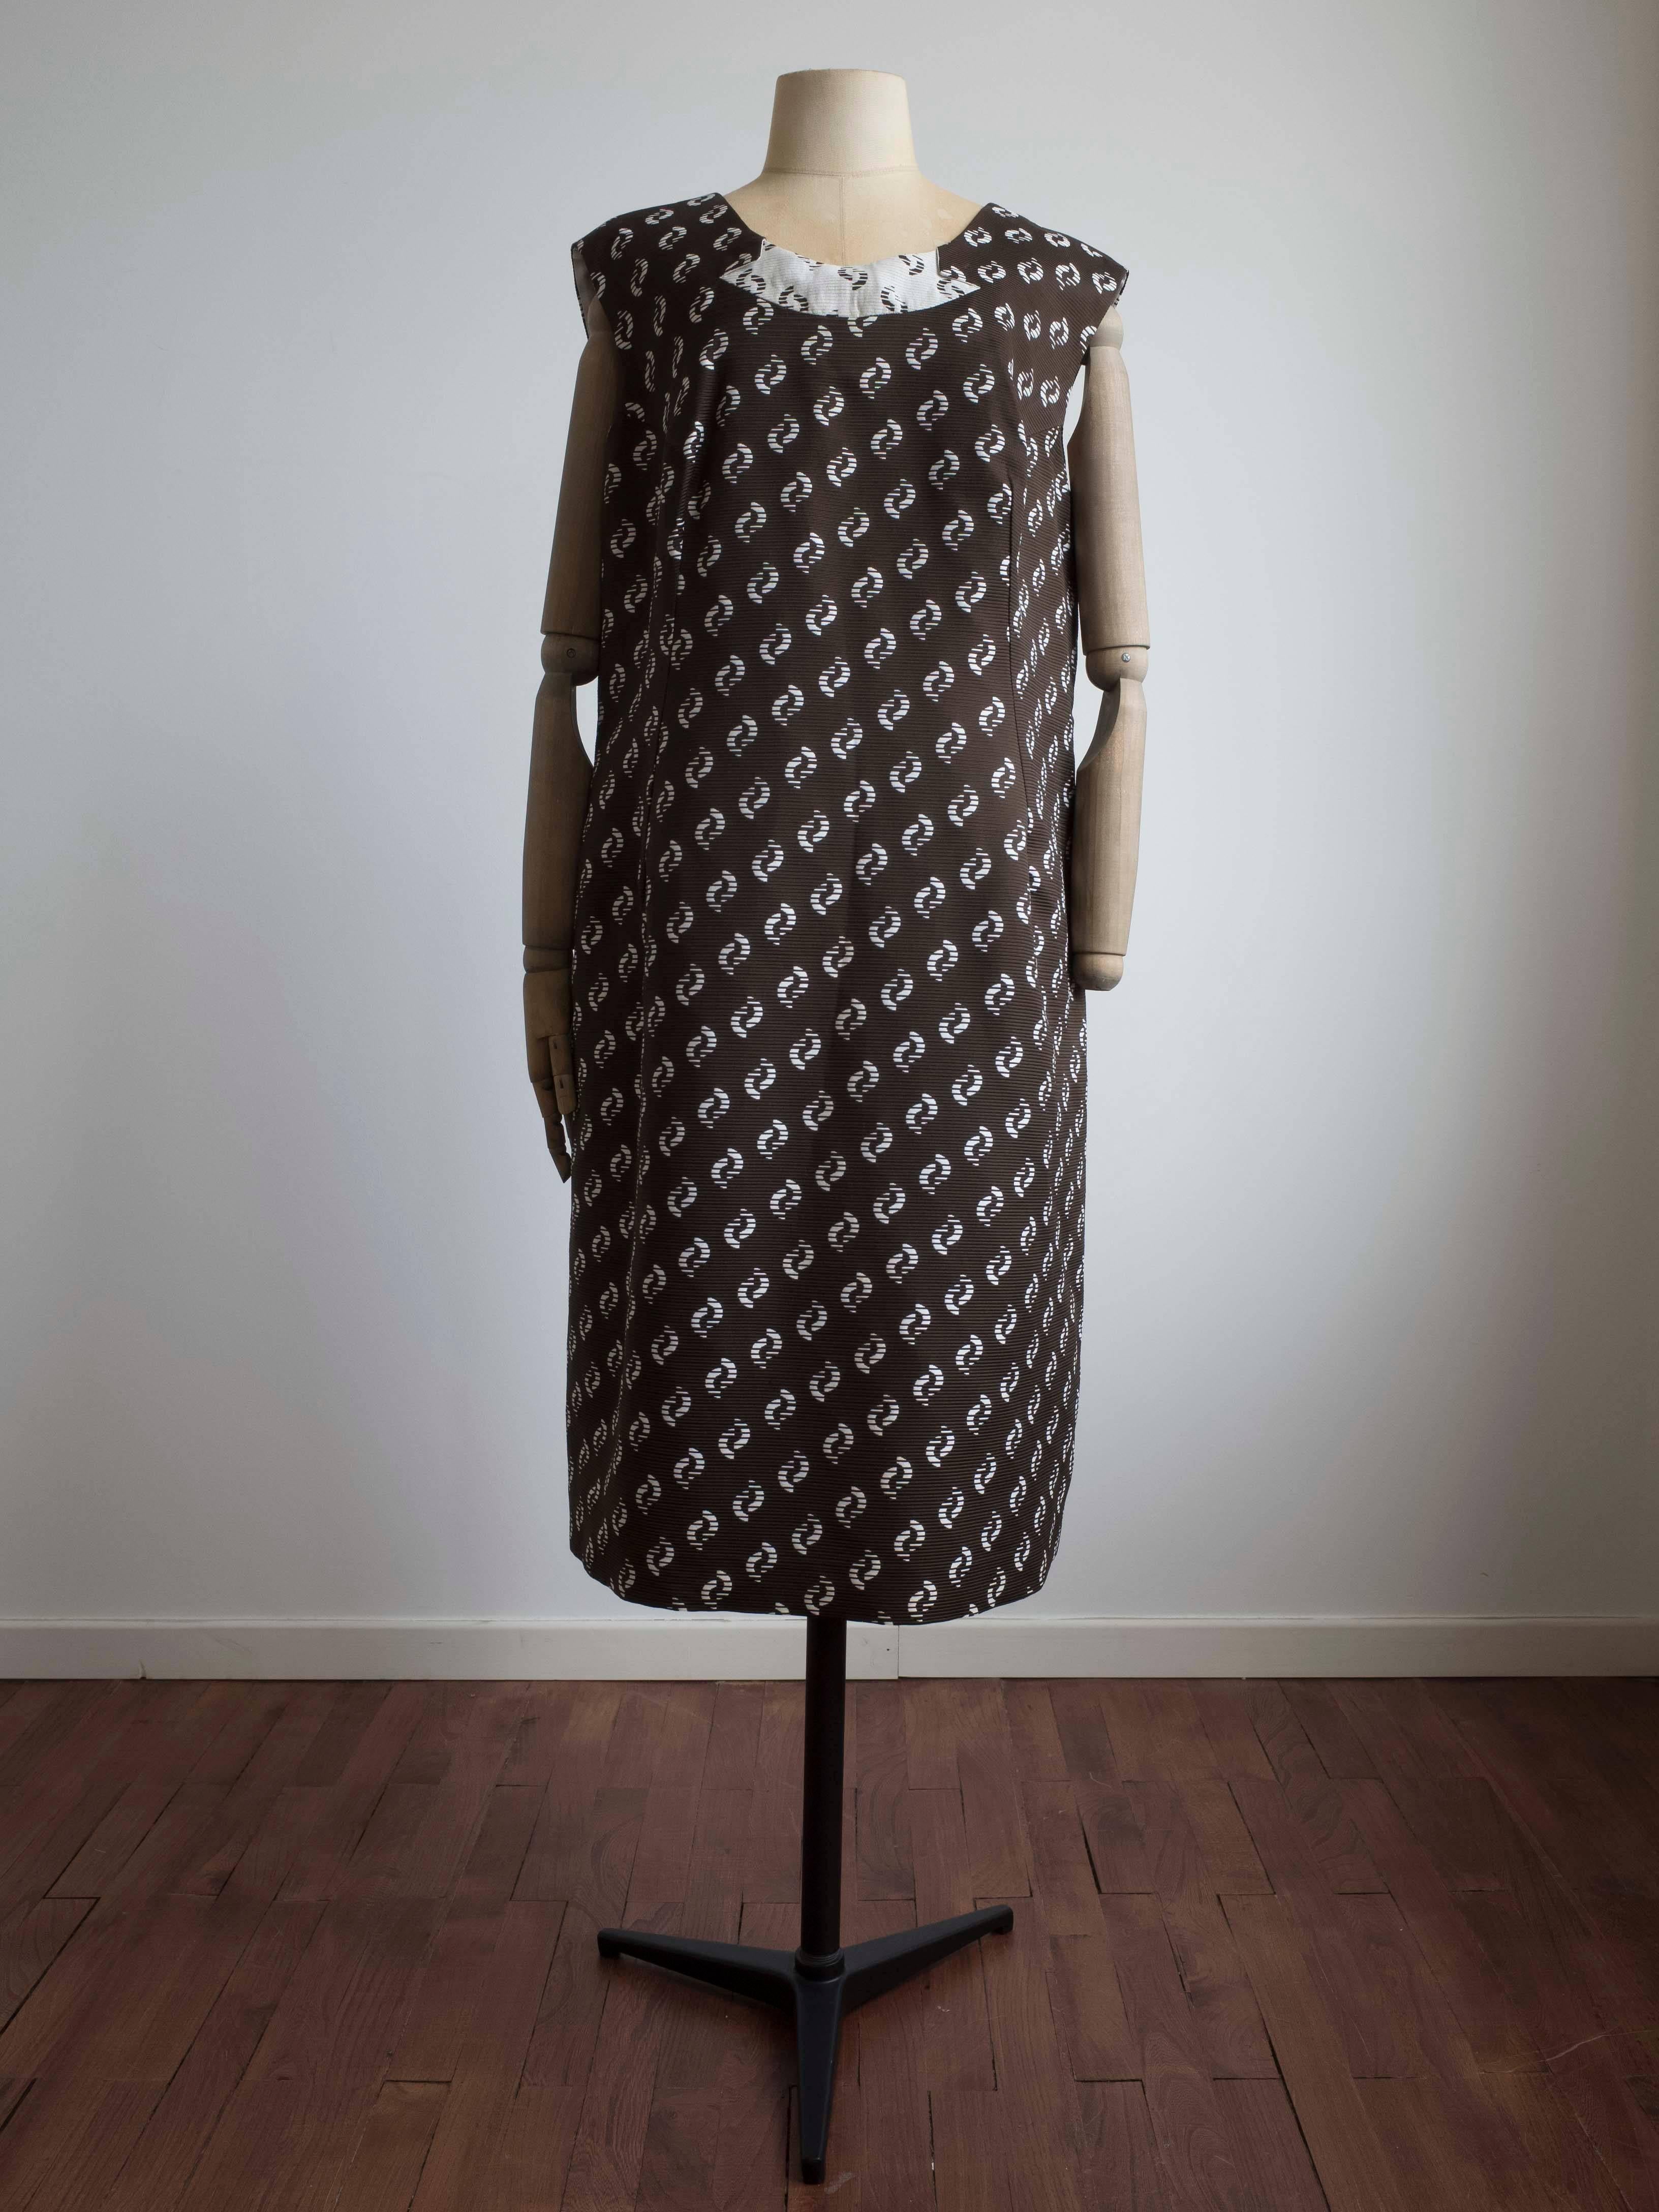 1960s Swing coat and matching shift dress.
All over print in a chocolate brown with white abstract shapes. Matching contrast accents in white reverse print.
The coat features decorative slit sleeves and pearl and silver accent buttons.
The dress is